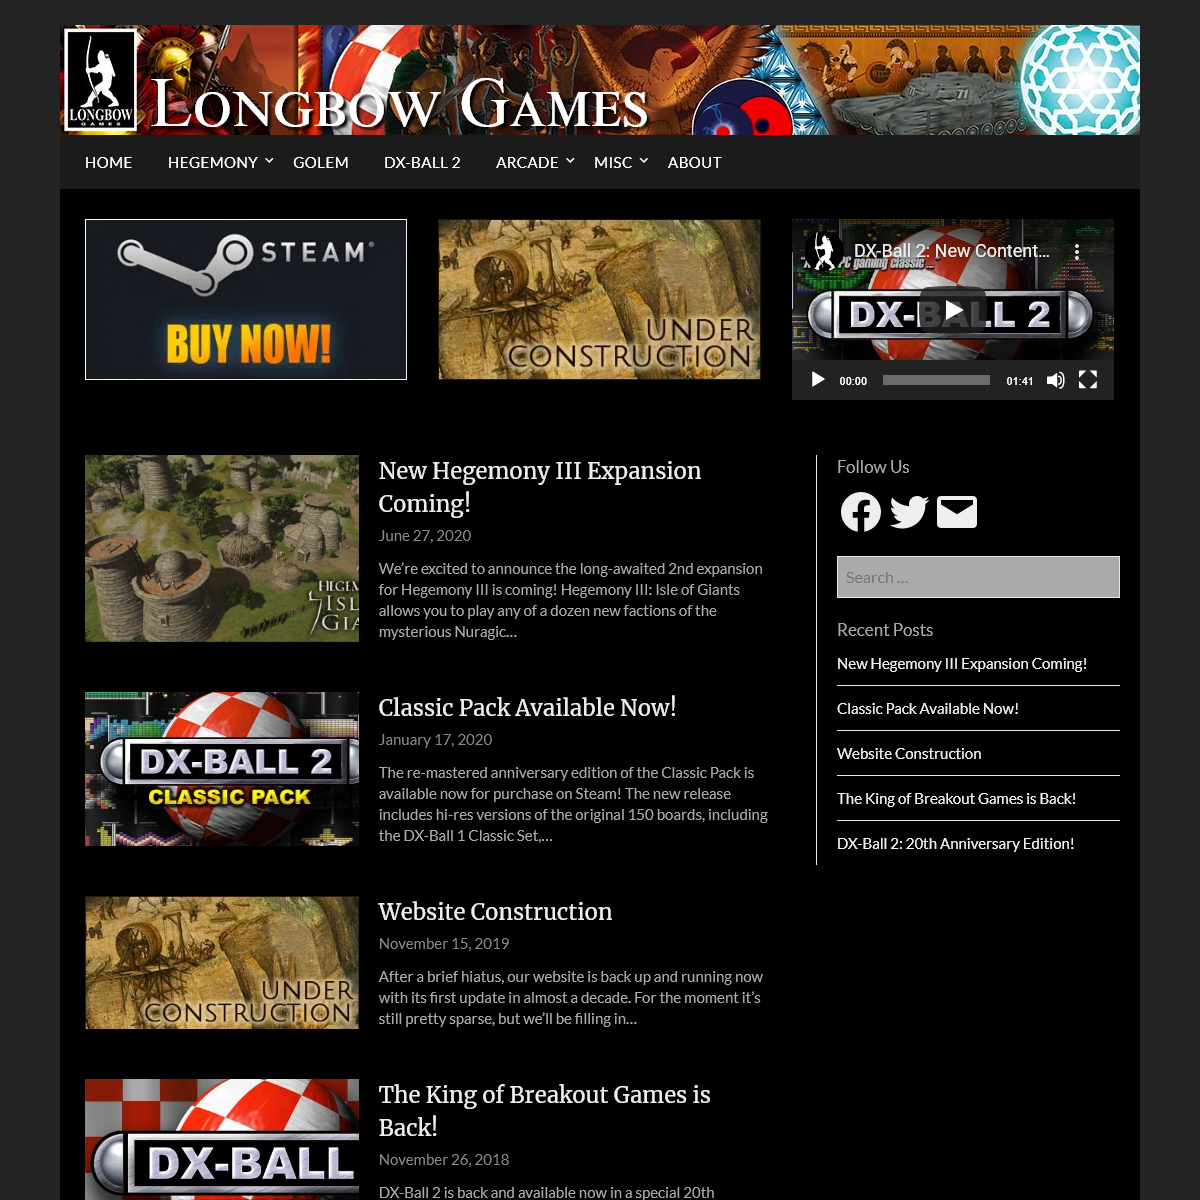 A complete backup of longbowgames.com